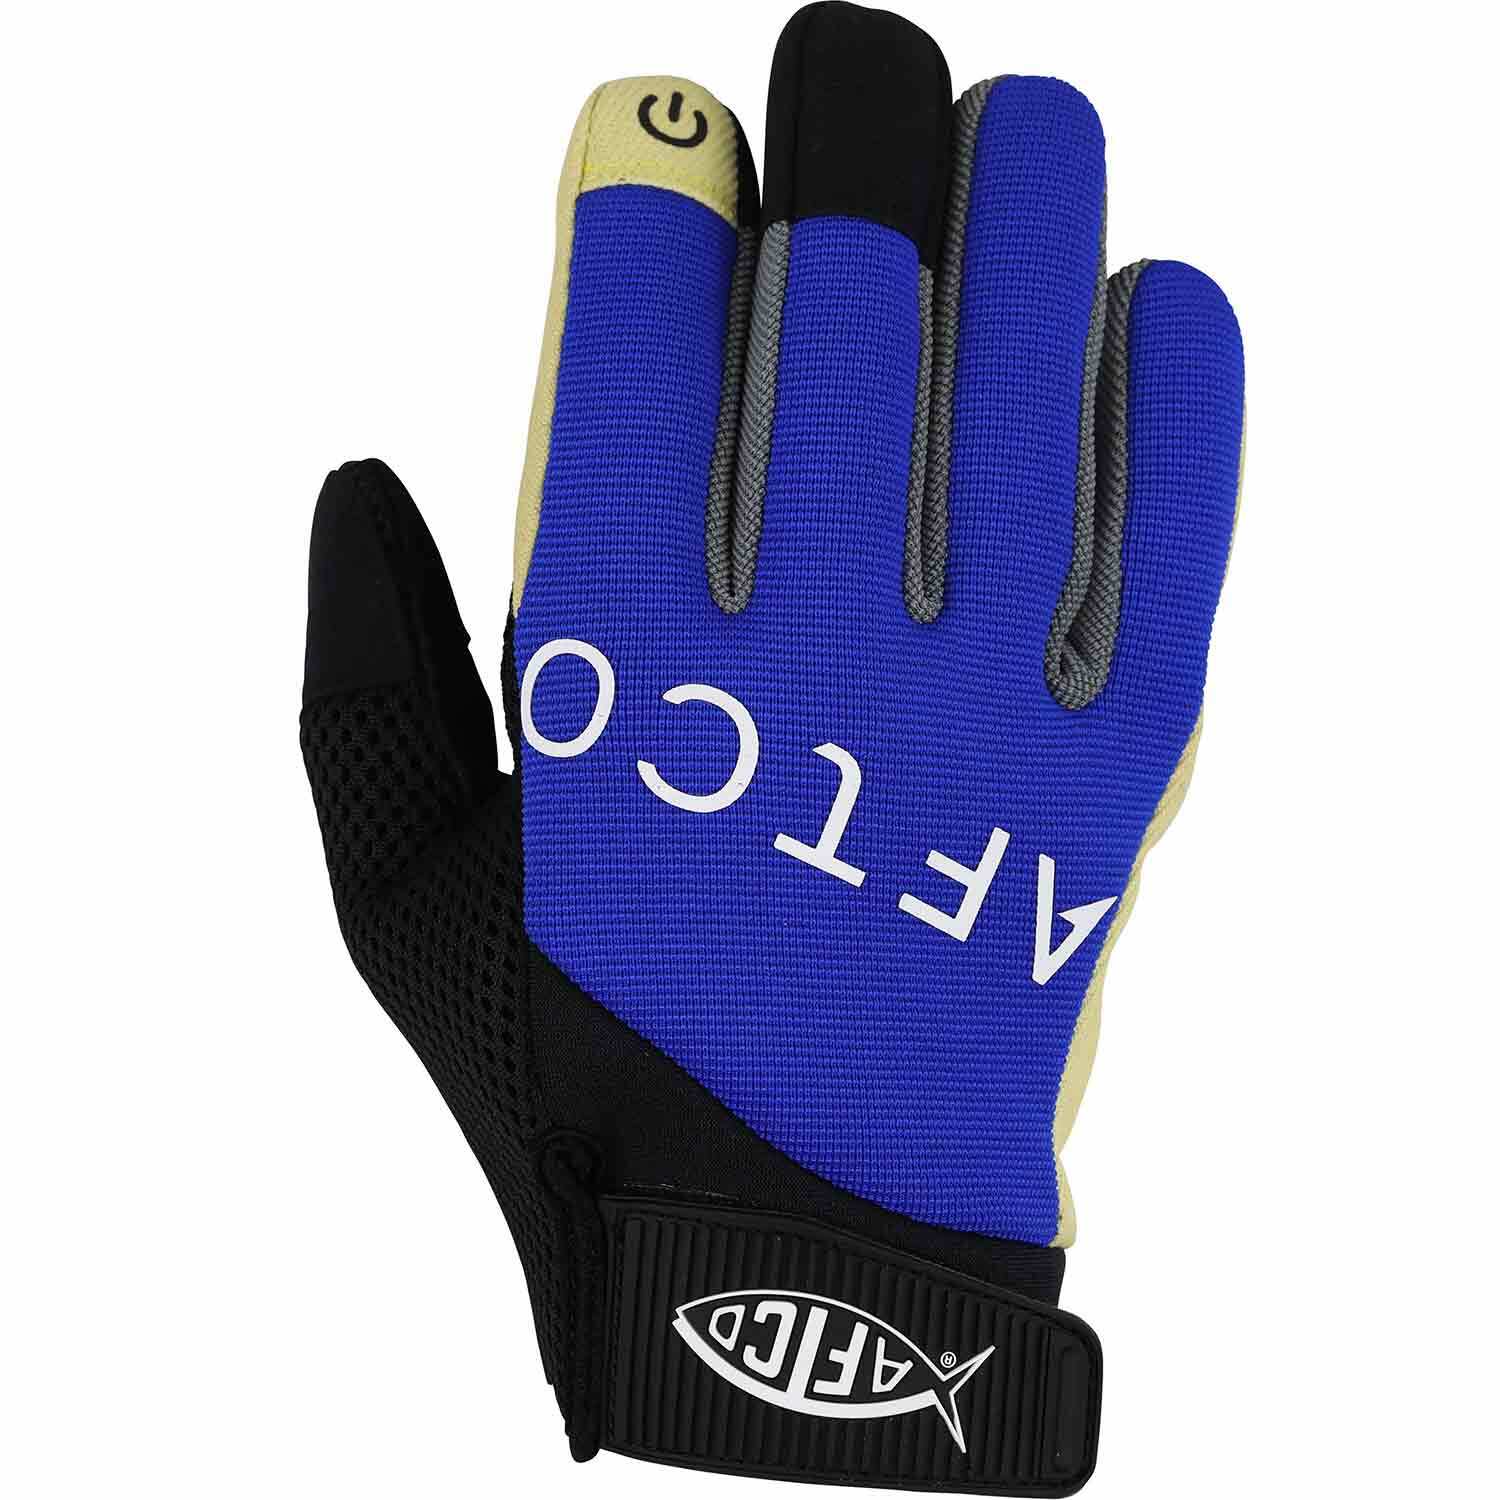 AFTCO Release Fishing Gloves